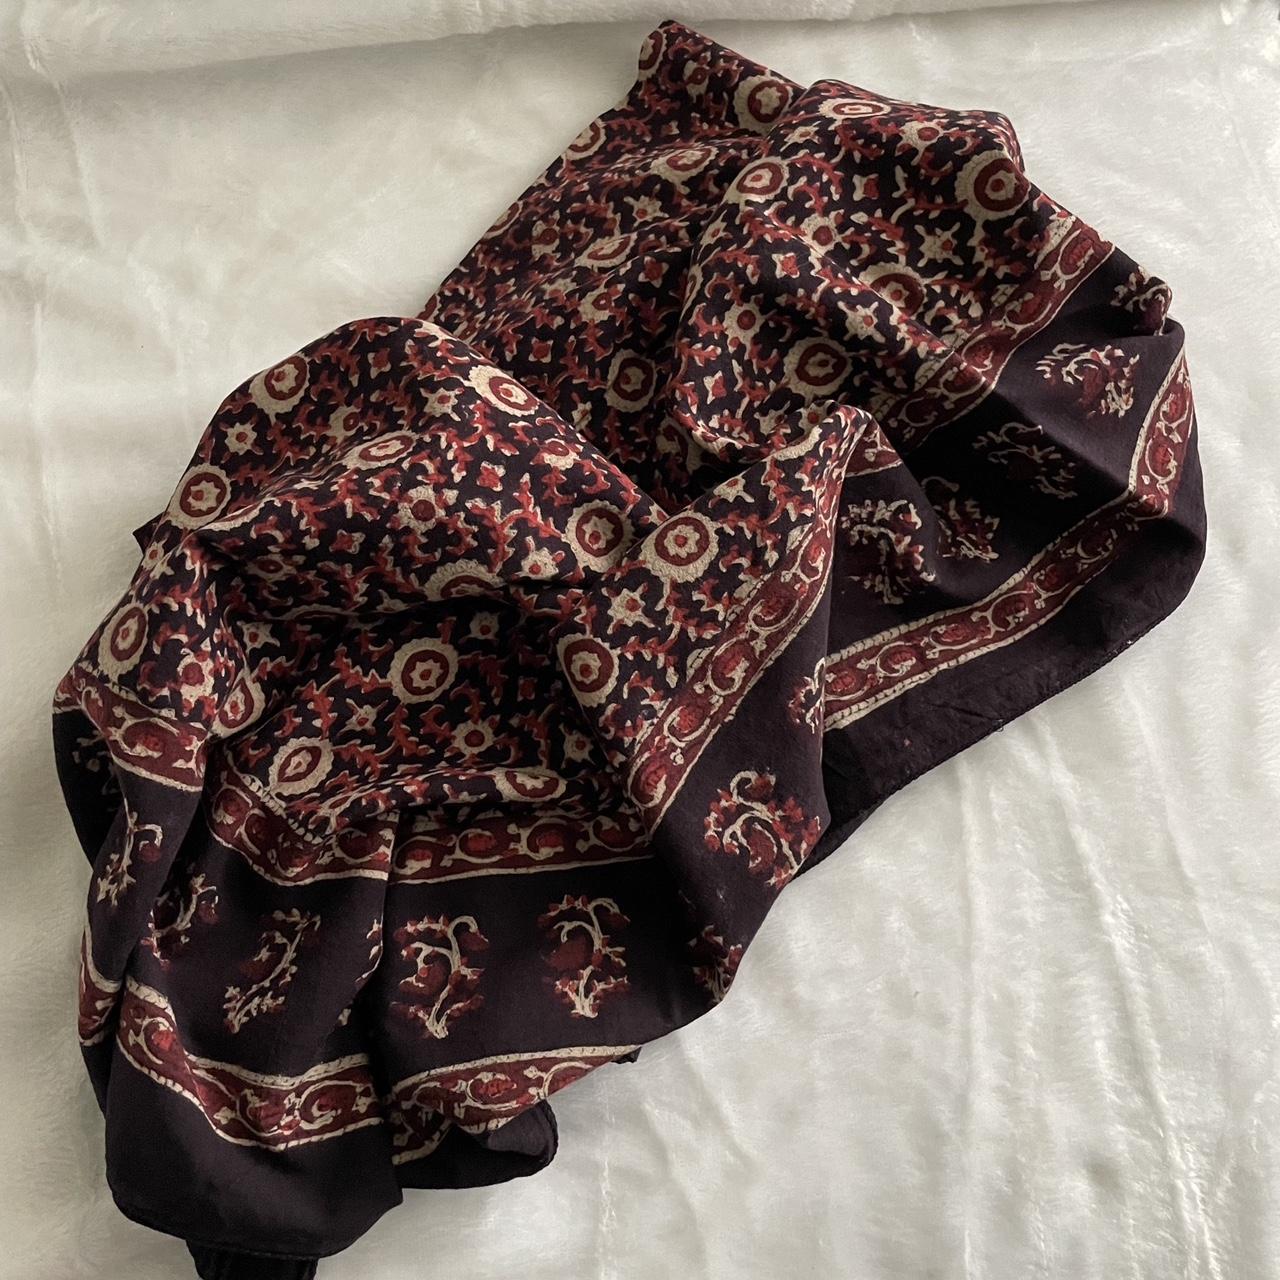 ANOKHI Women's Pink and Brown Scarf-wraps (2)